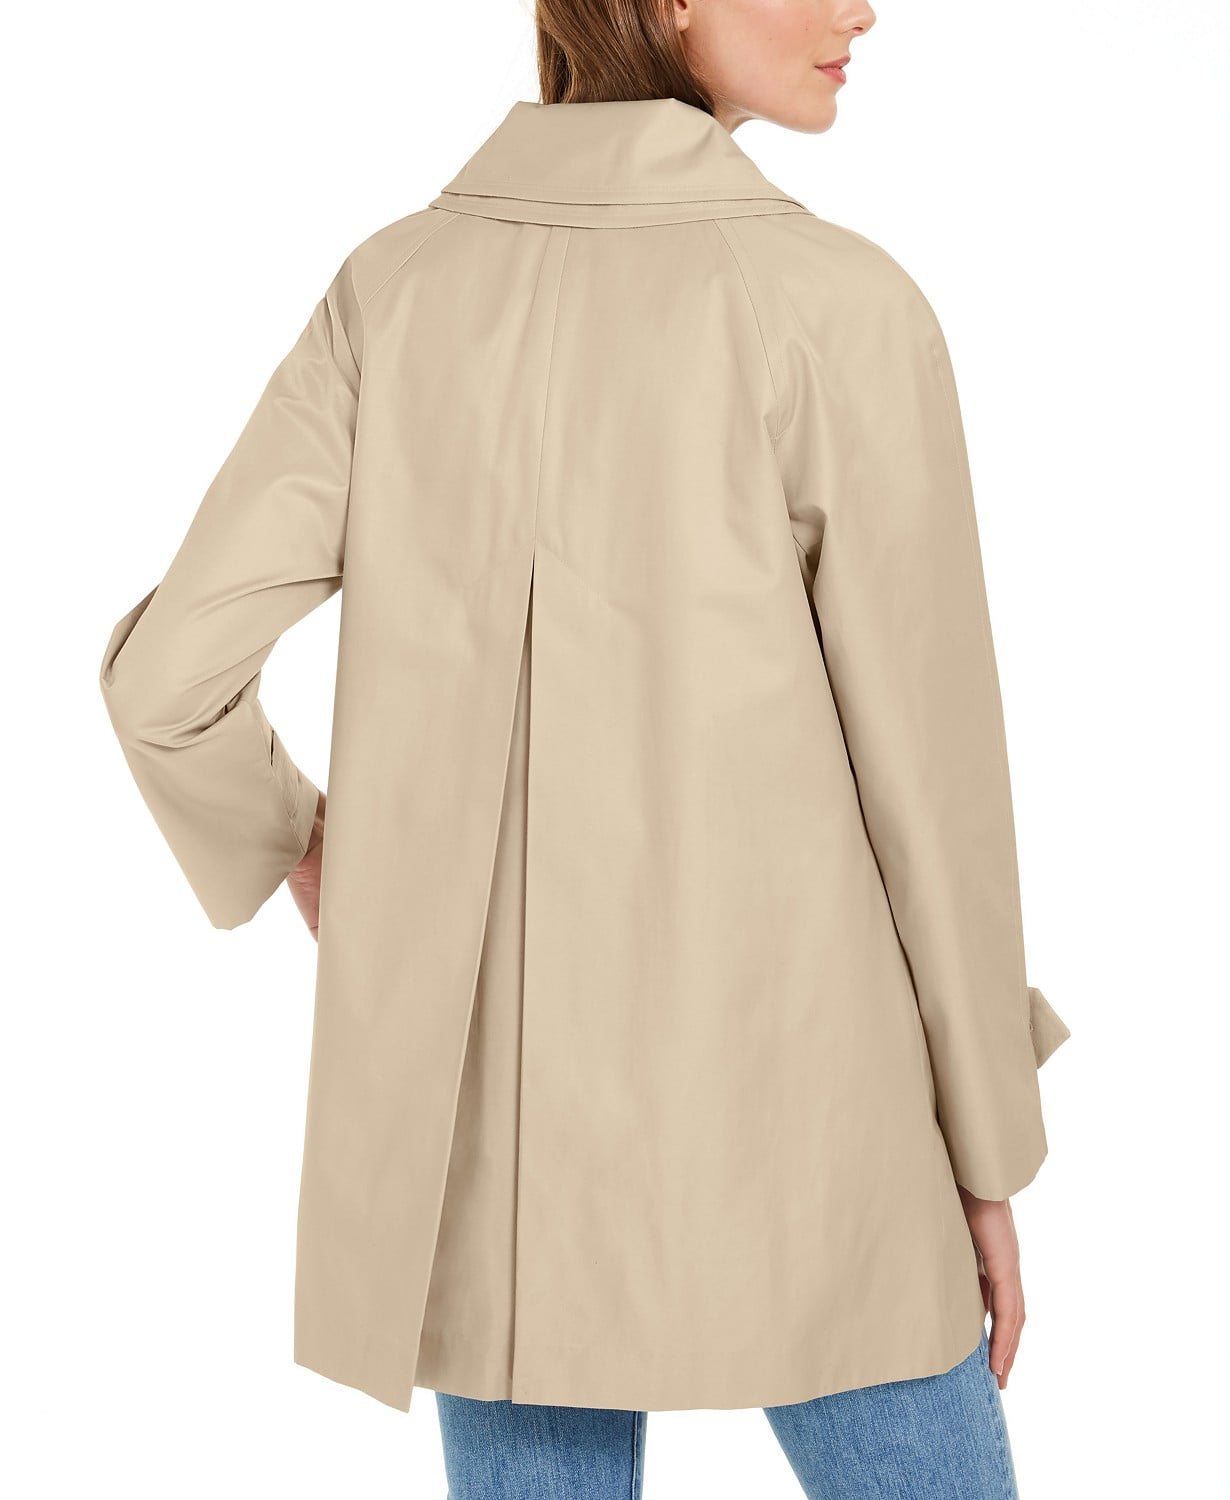 www.couturepoint.com-london-fog-womens-beige-hooded-water-resistant-raincoat